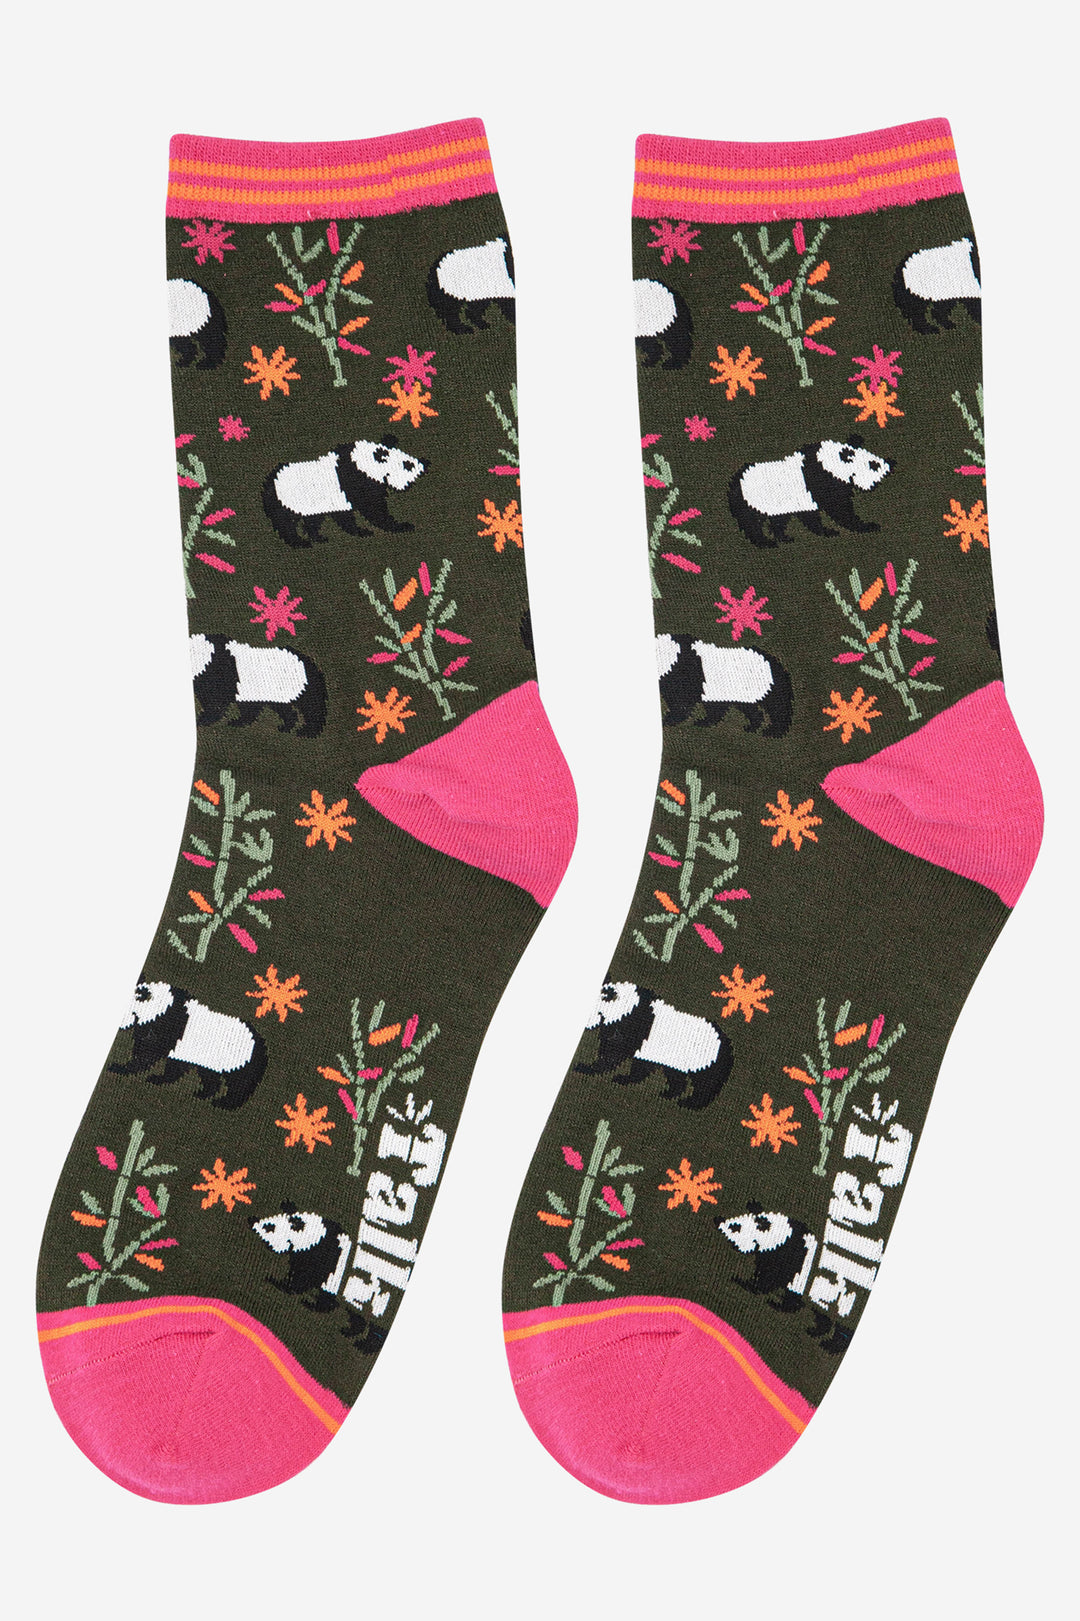 khaki green and pink ankle socks with an all over pattern of pandas and bamboo leaves